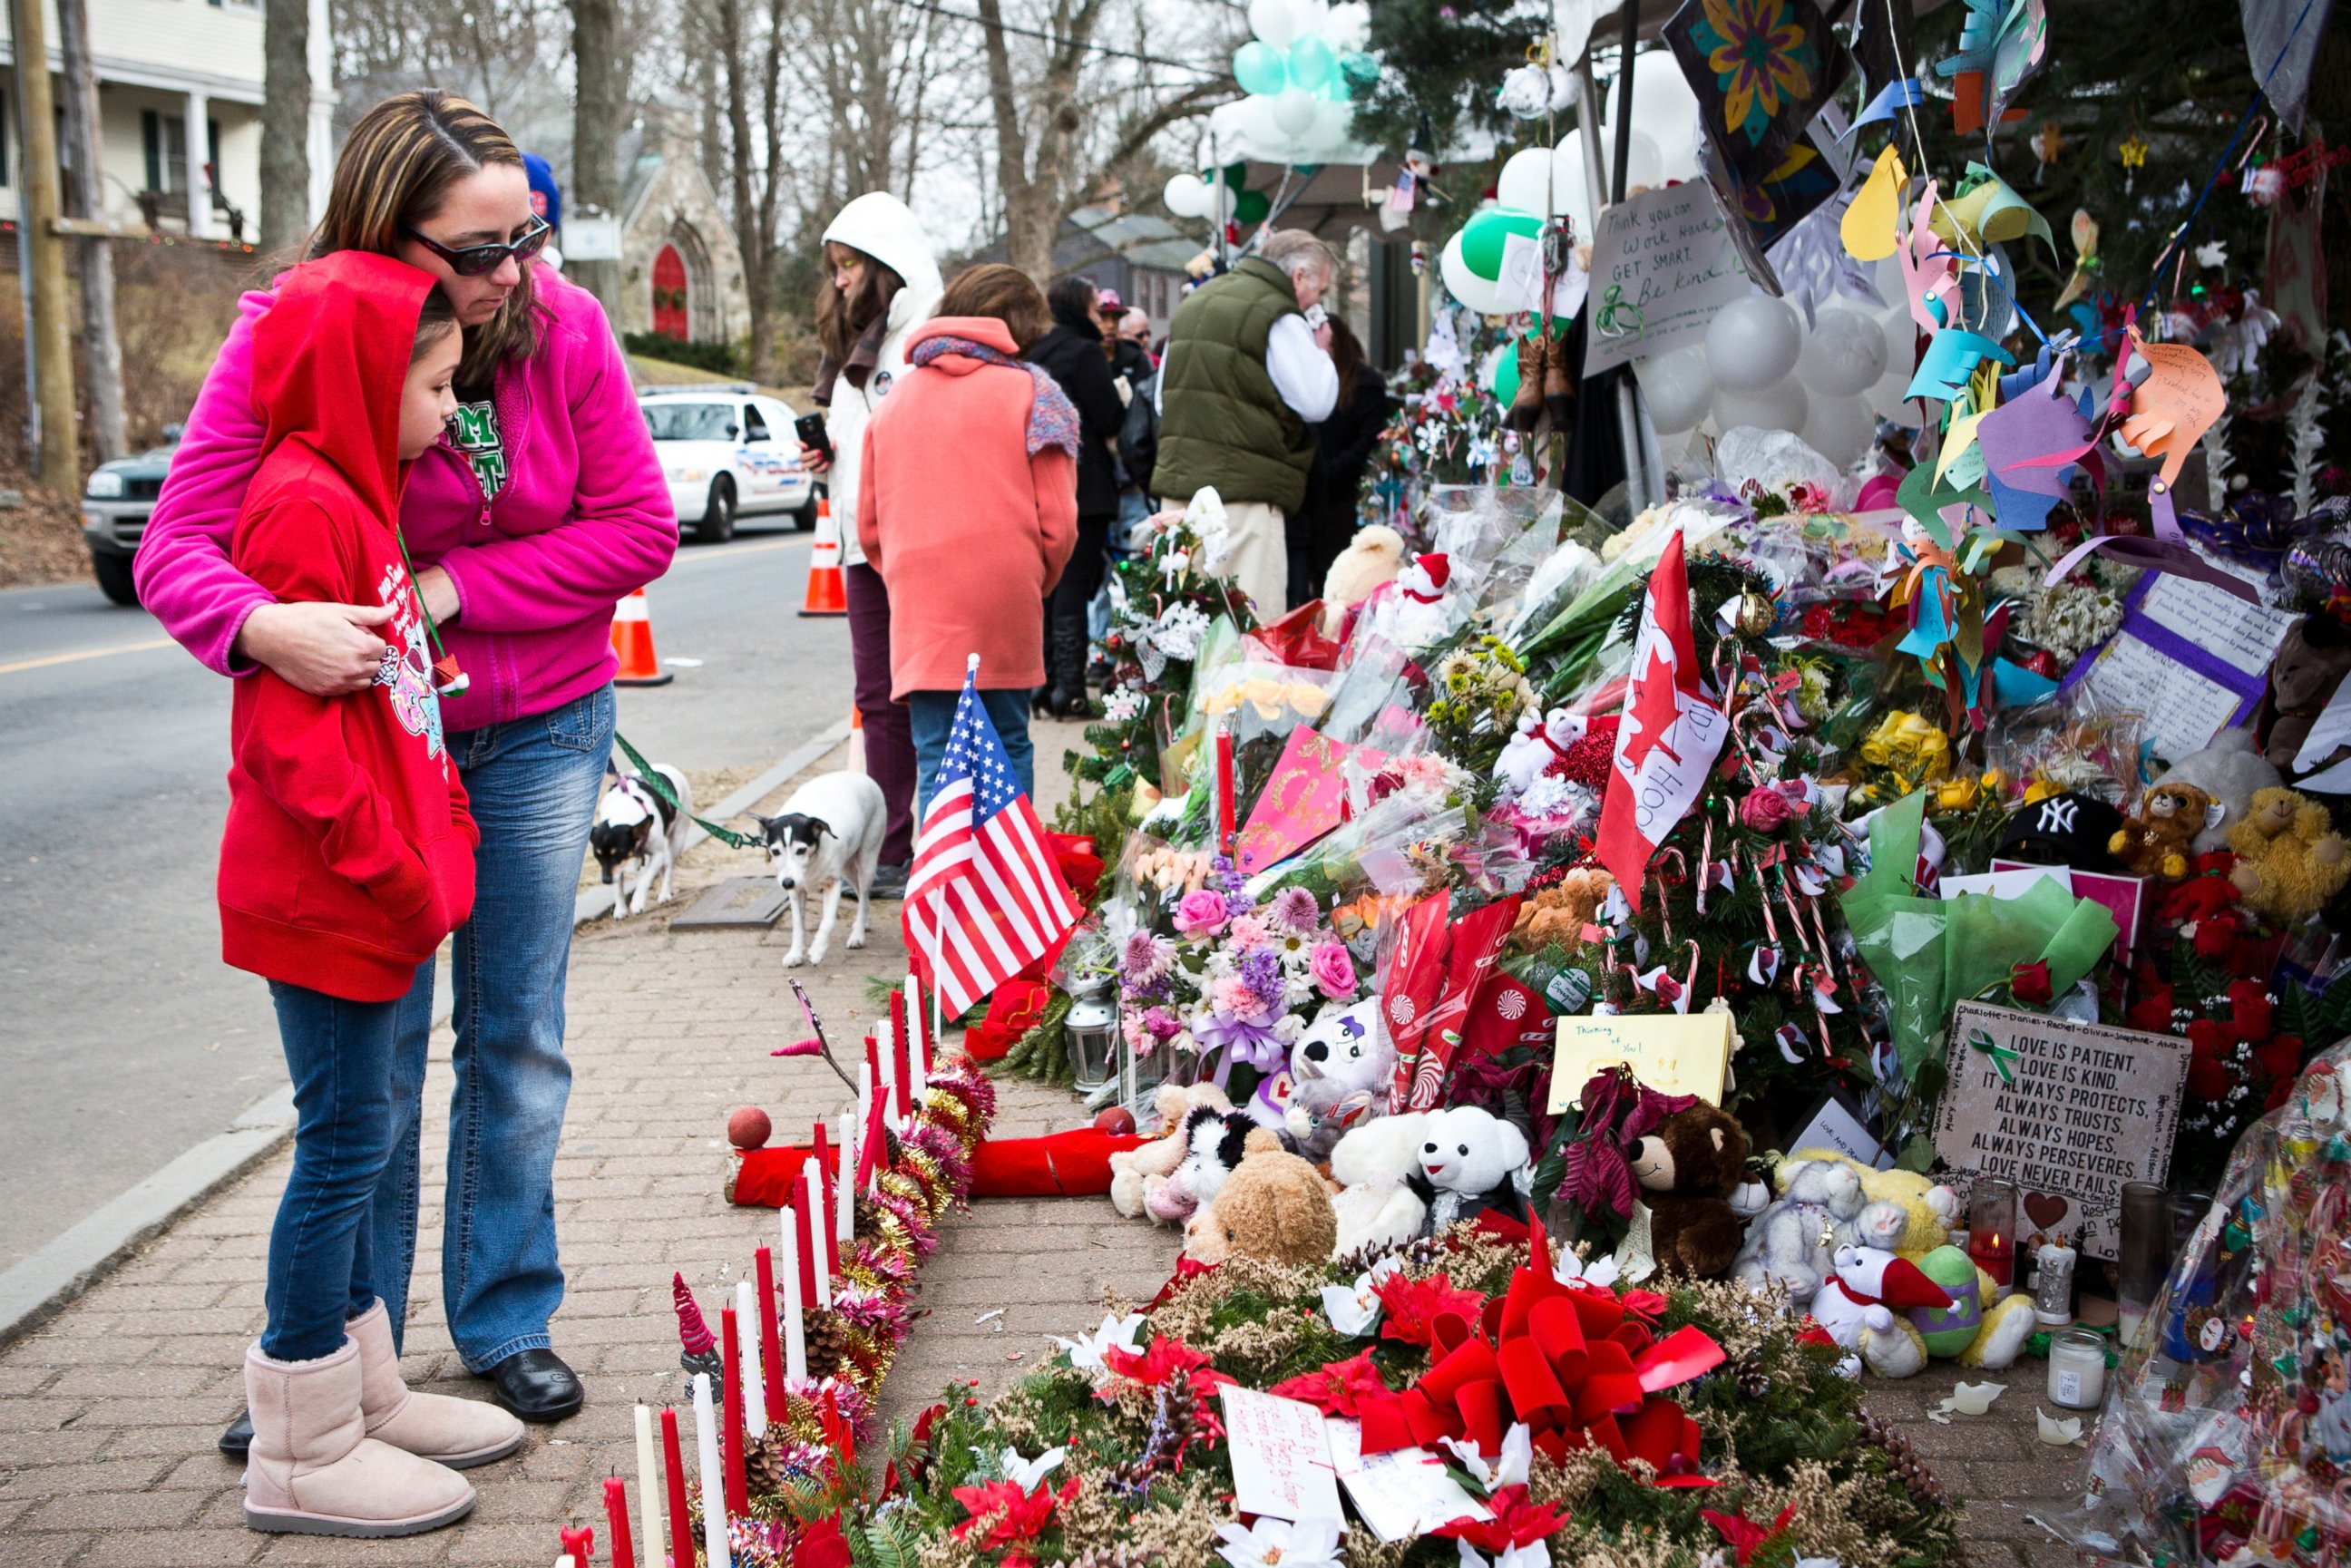 PHOTO: Deborah Gibelli holds her daughter, Alexandra Gibelli, age 9, while looking at a memorial for those killed in the school shooting at Sandy Hook Elementary School, on Dec. 24, 2012 in Newtown, Connecticut. 